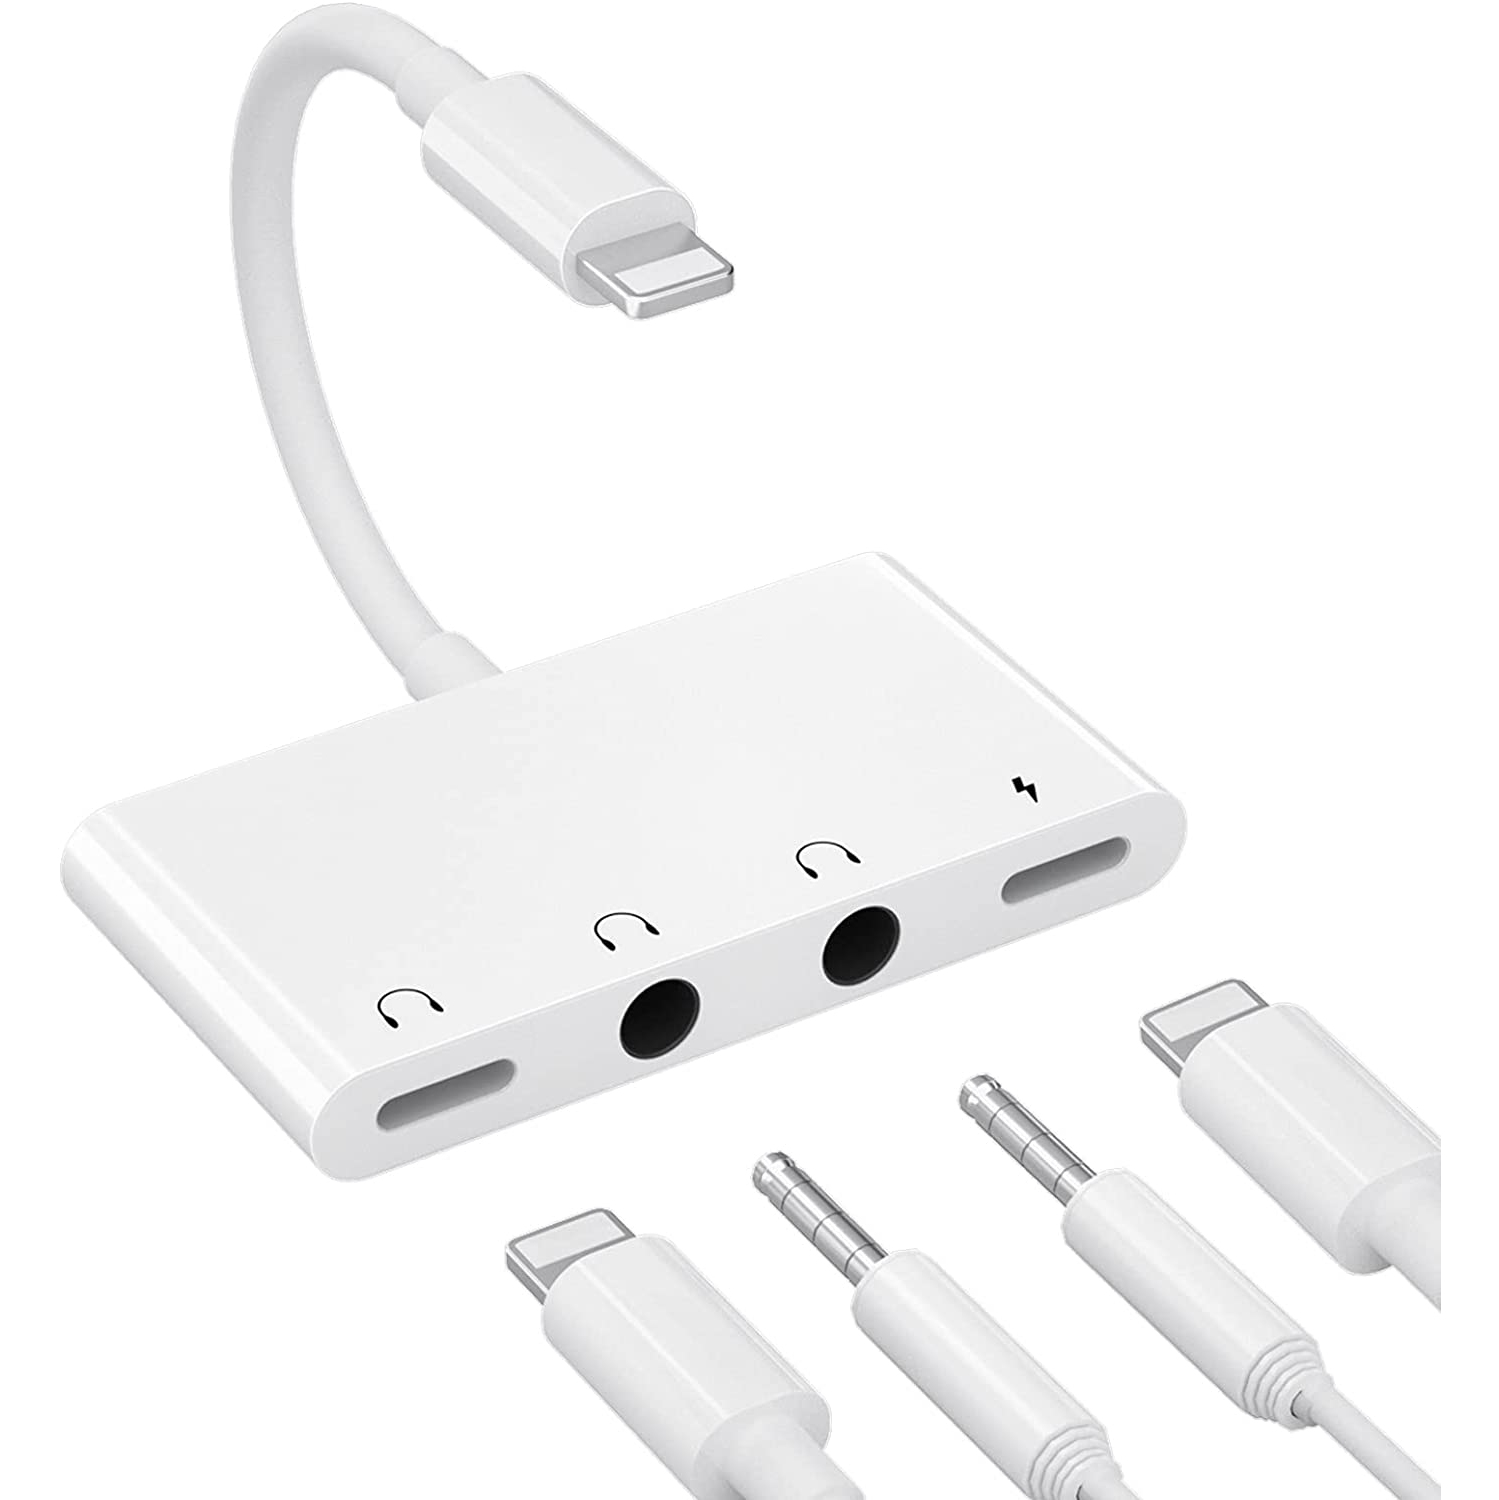 iPhone Headphone Adapter with Charge,Dual 3.5mm Headphone Jack Splitter,Compatible with iPhone13/12/11/11Pro/XR/XS/X,